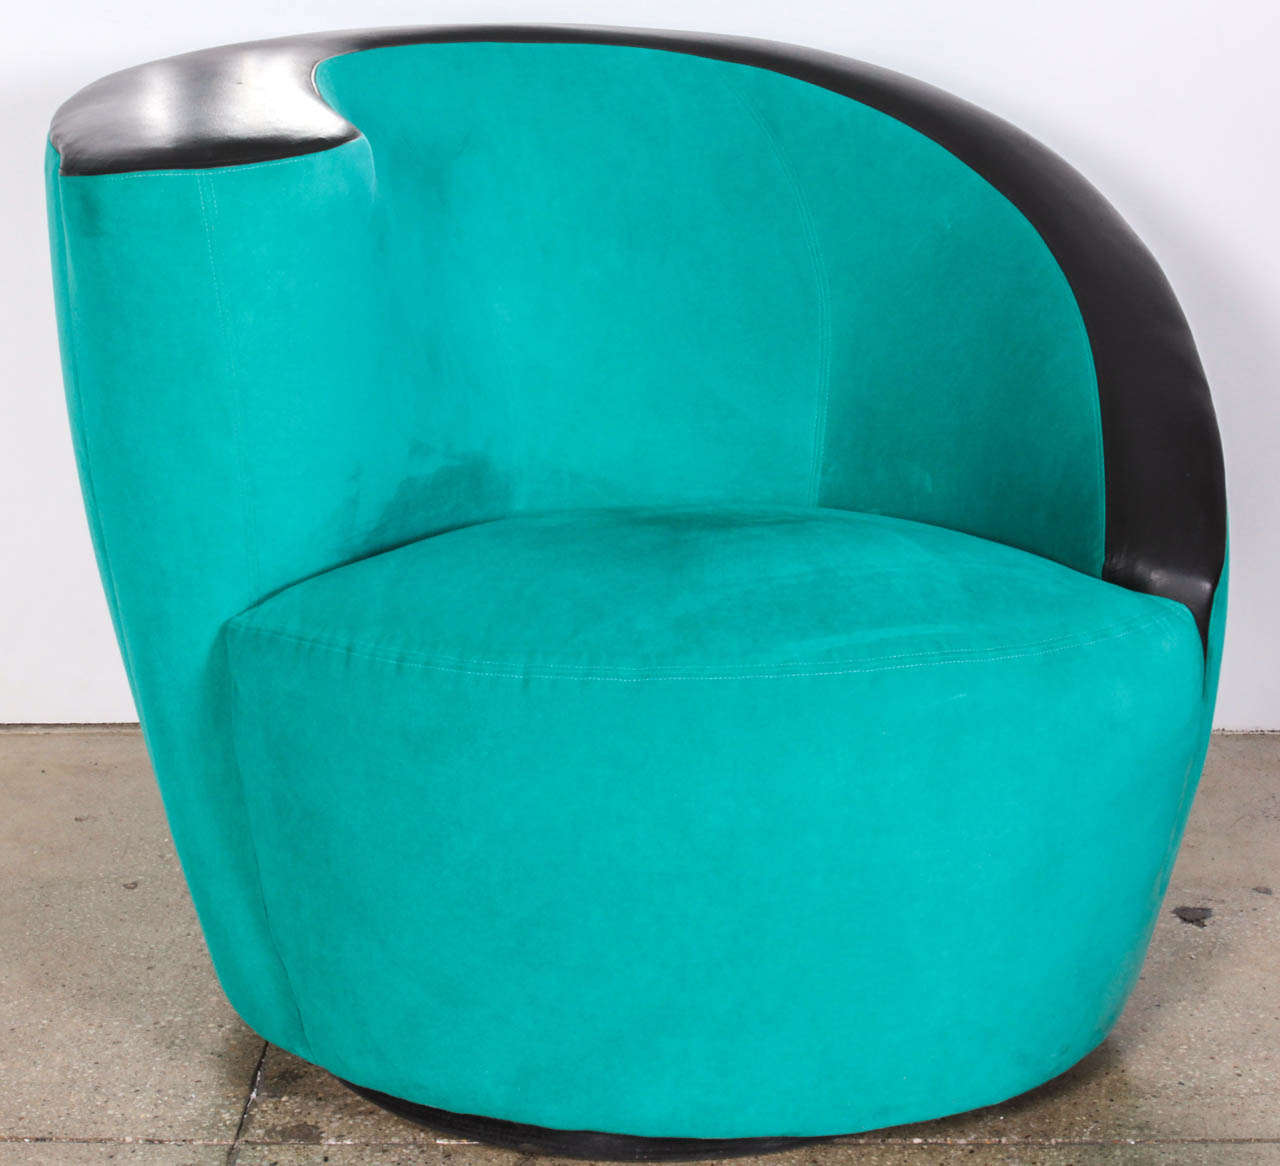 1980's chic pair of swiveling nautilus chairs in a Teal Green ultra suede and contrasting Black leather, designed by Vladimir Kagan. Mint, like new condition.